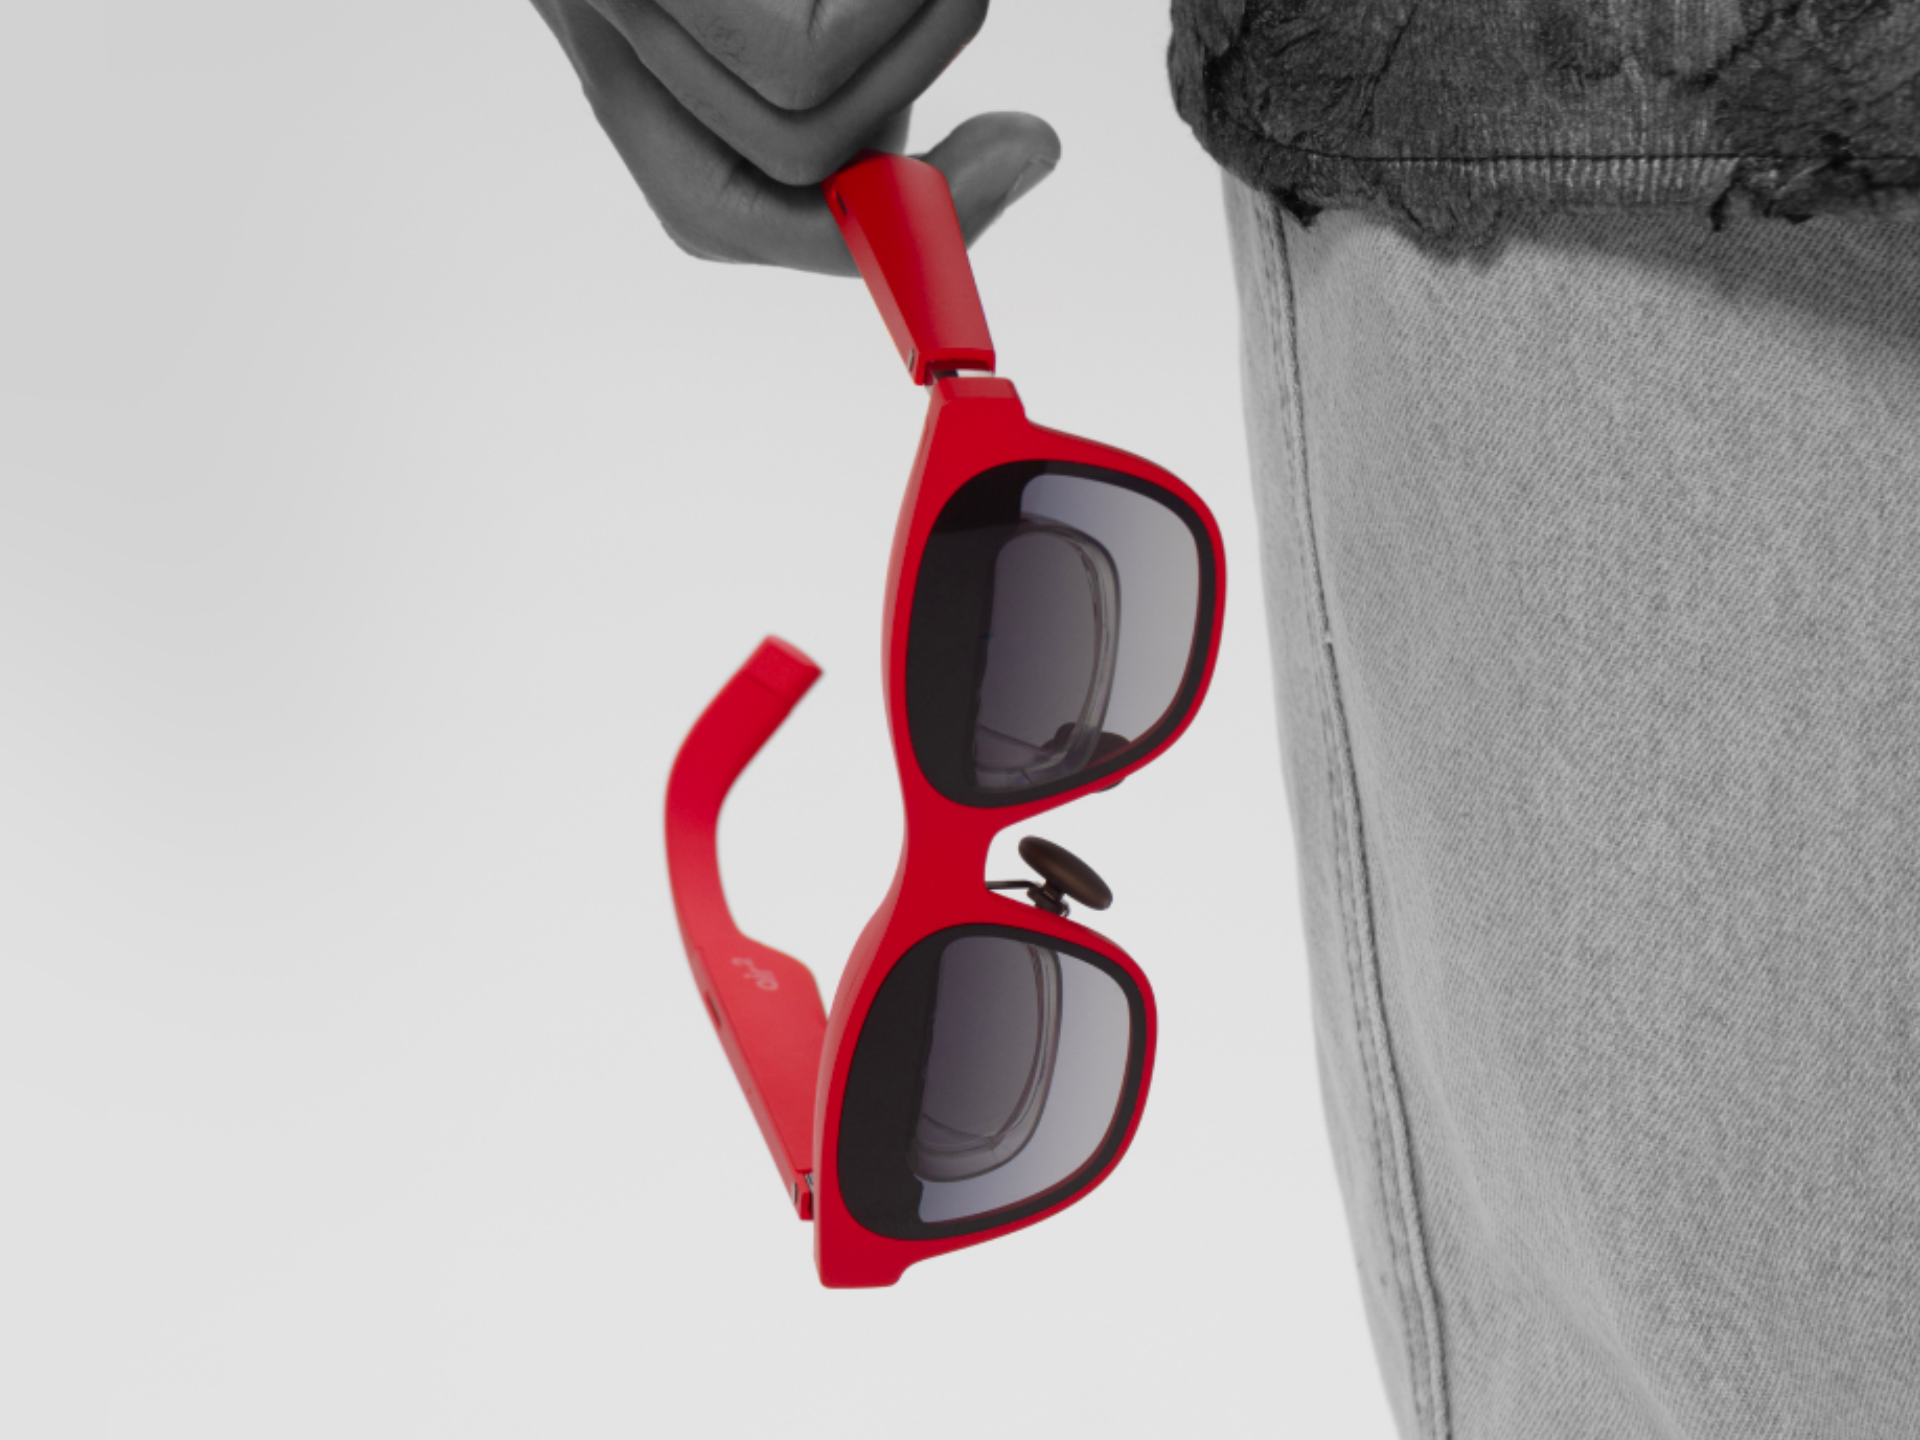 Xreal Air 2 AR glasses first major launch for rebranded Nreal - Dexerto